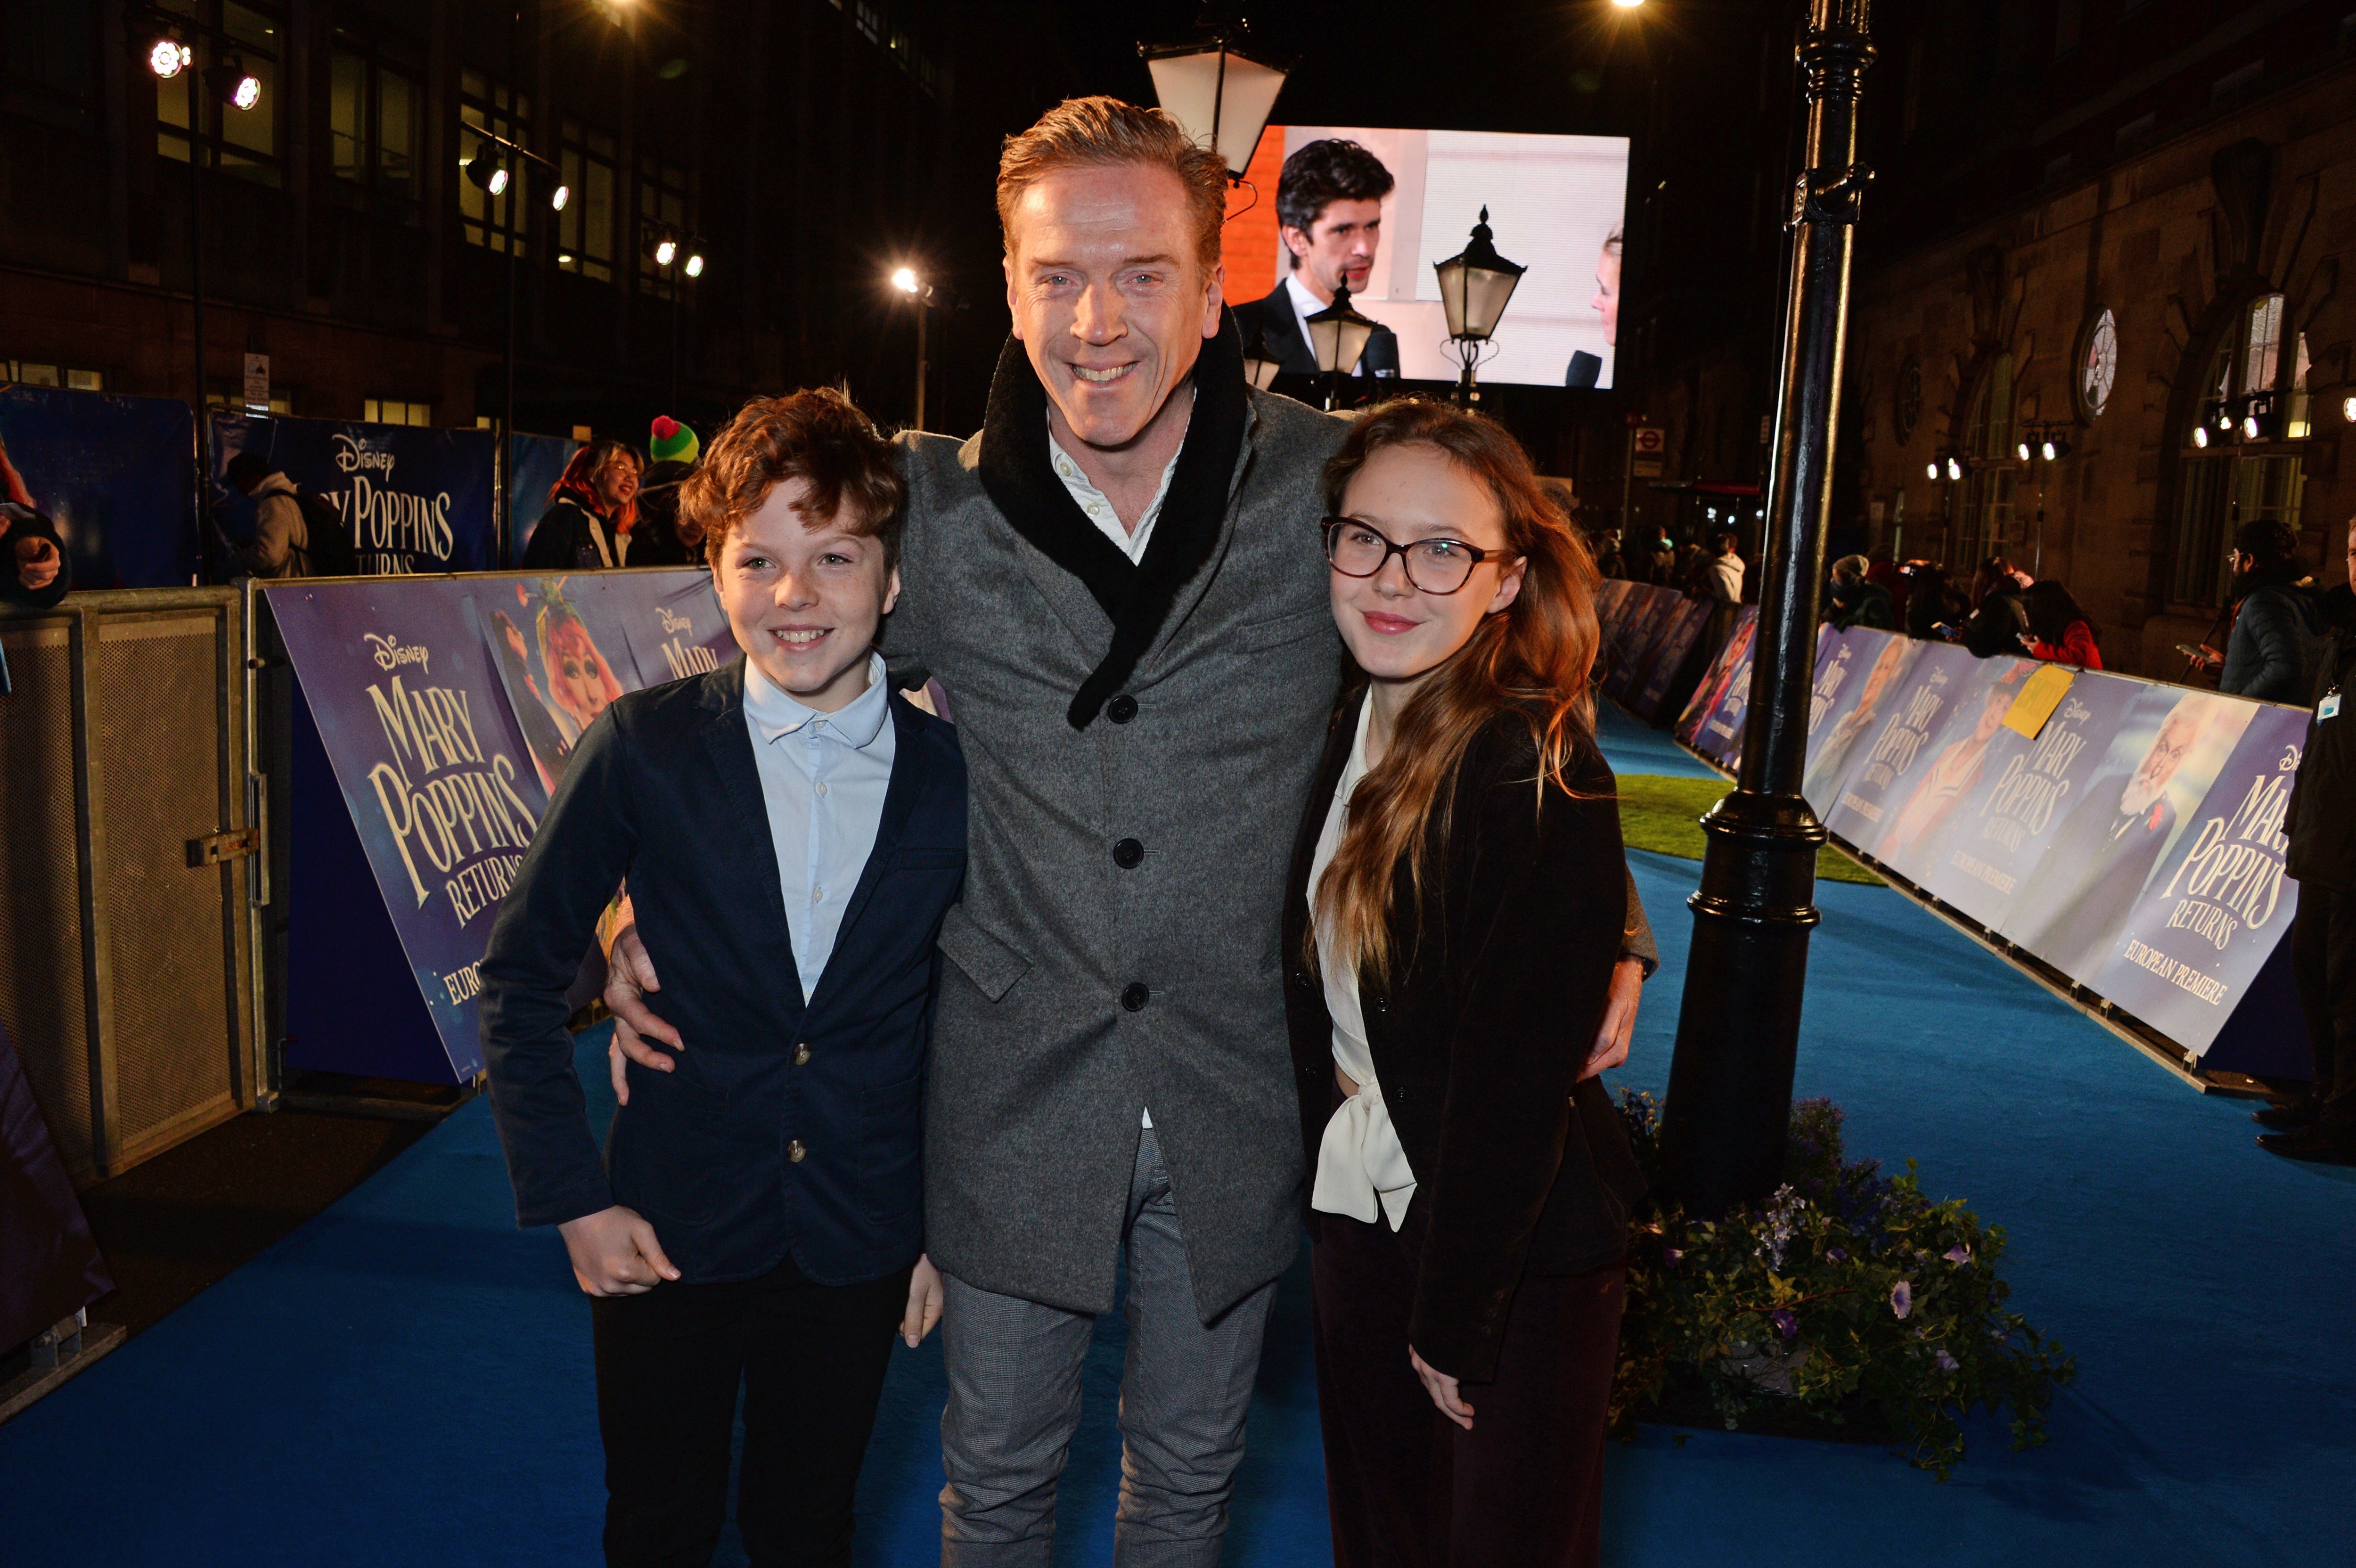 Gulliver Lewis, Damian Lewis and Manon McCrory-Lewis attend the European Premiere of "Mary Poppins Returns" at Royal Albert Hall on December 12, 2018 in London, England. | Source: Getty Images